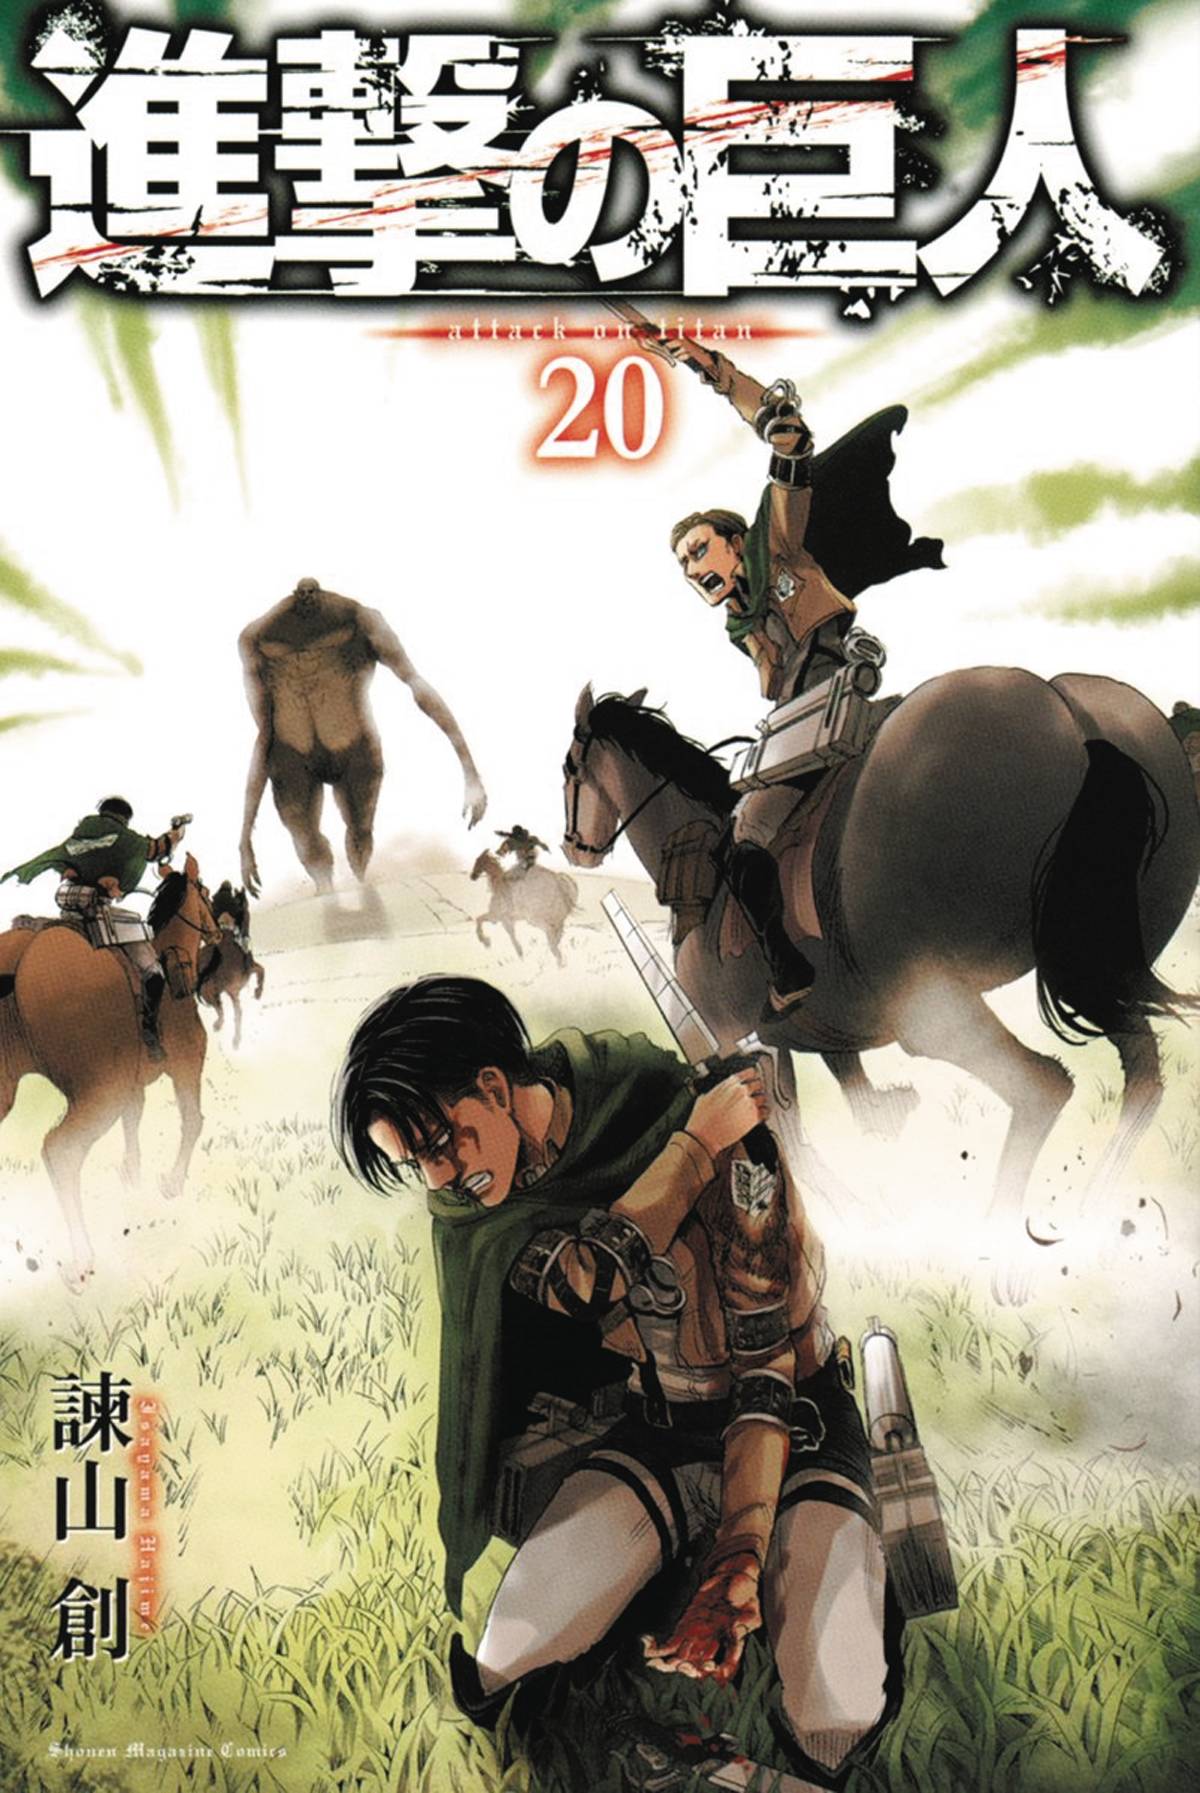 Attack on Titan Manga Volume 20 Special Edition With DVD